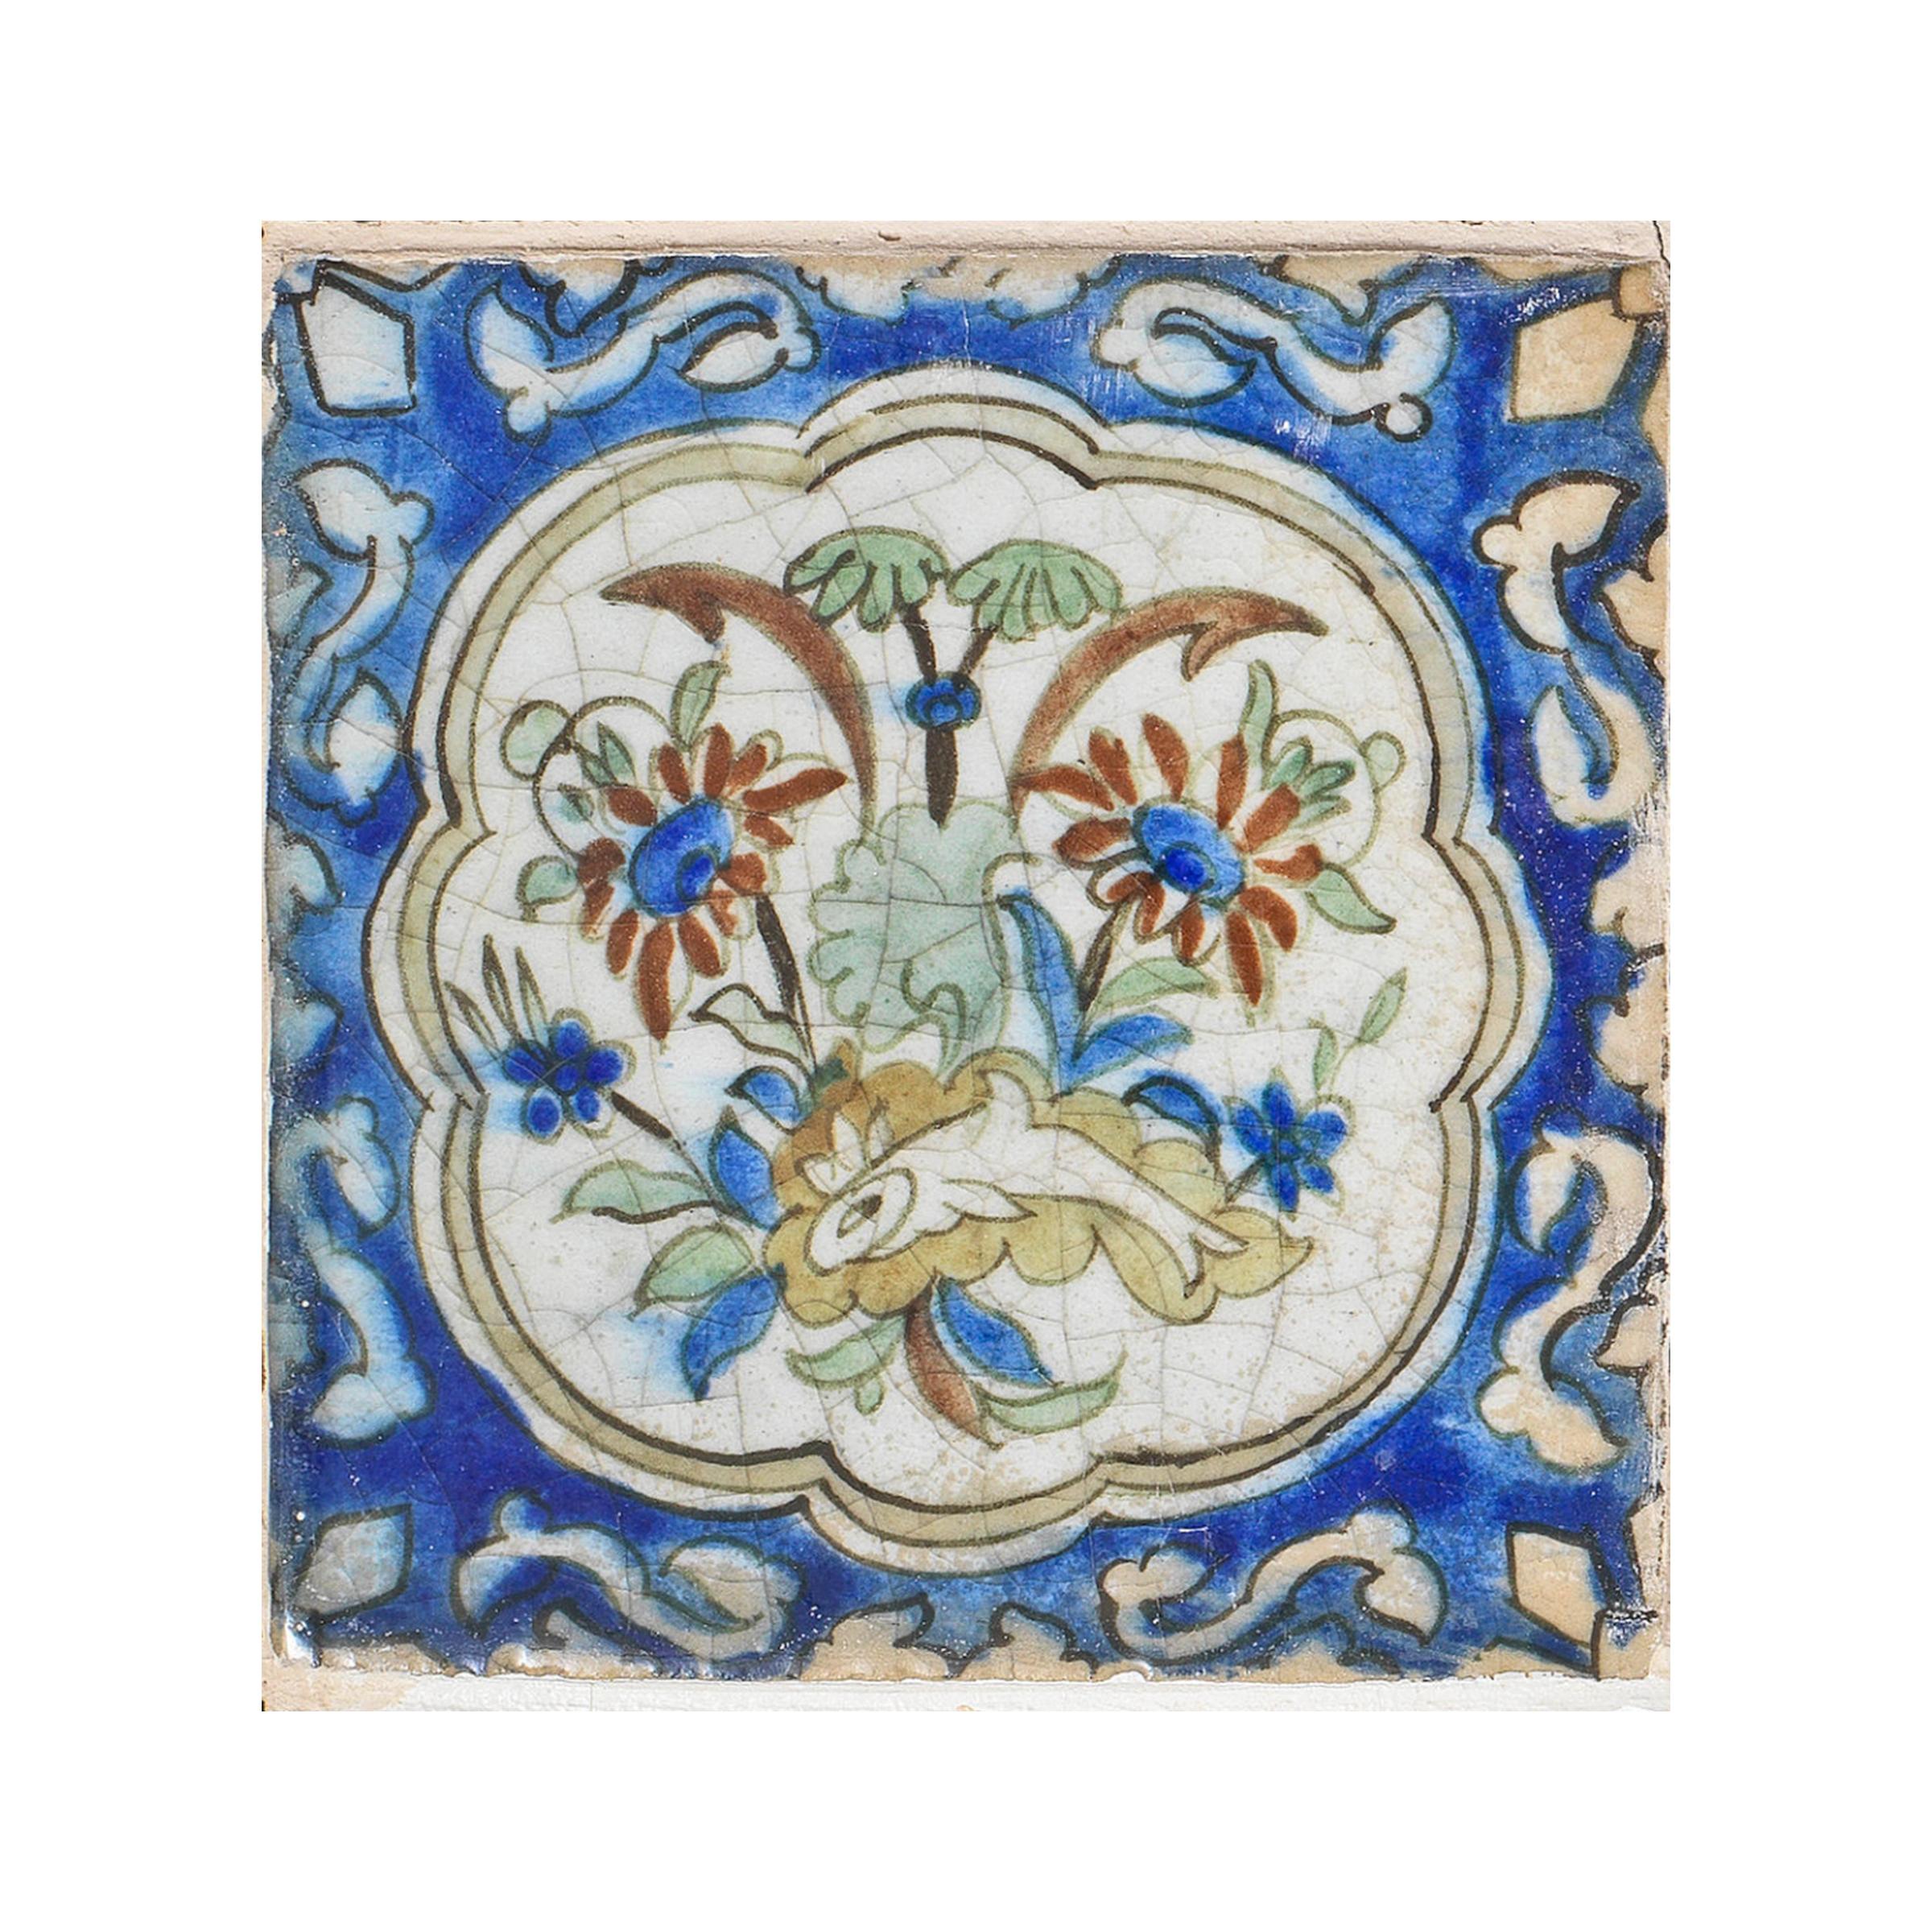 Each tile of square form and decorated in cobalt blue, green, red, mustard yellow and manganese on a white ground with lobed cartouches filled with varied floral motifs and surrounded by scrolling vines, framed.
   